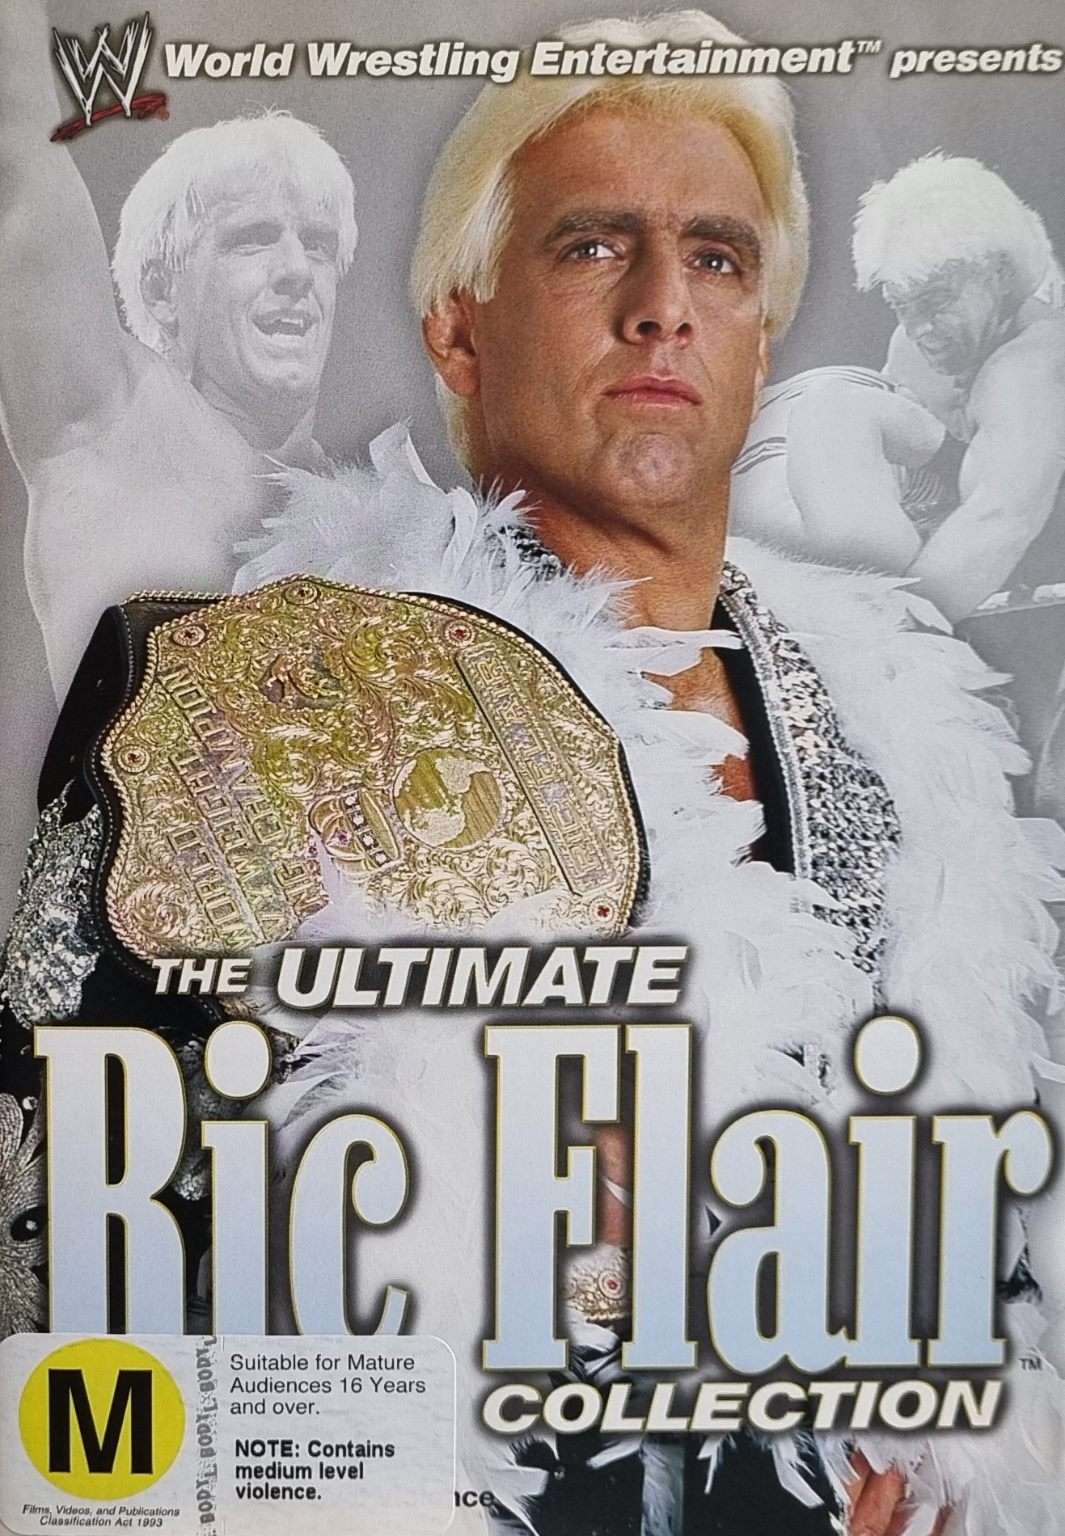 WWE: The Ultimate Ric Flair Collection 3 Disc Set